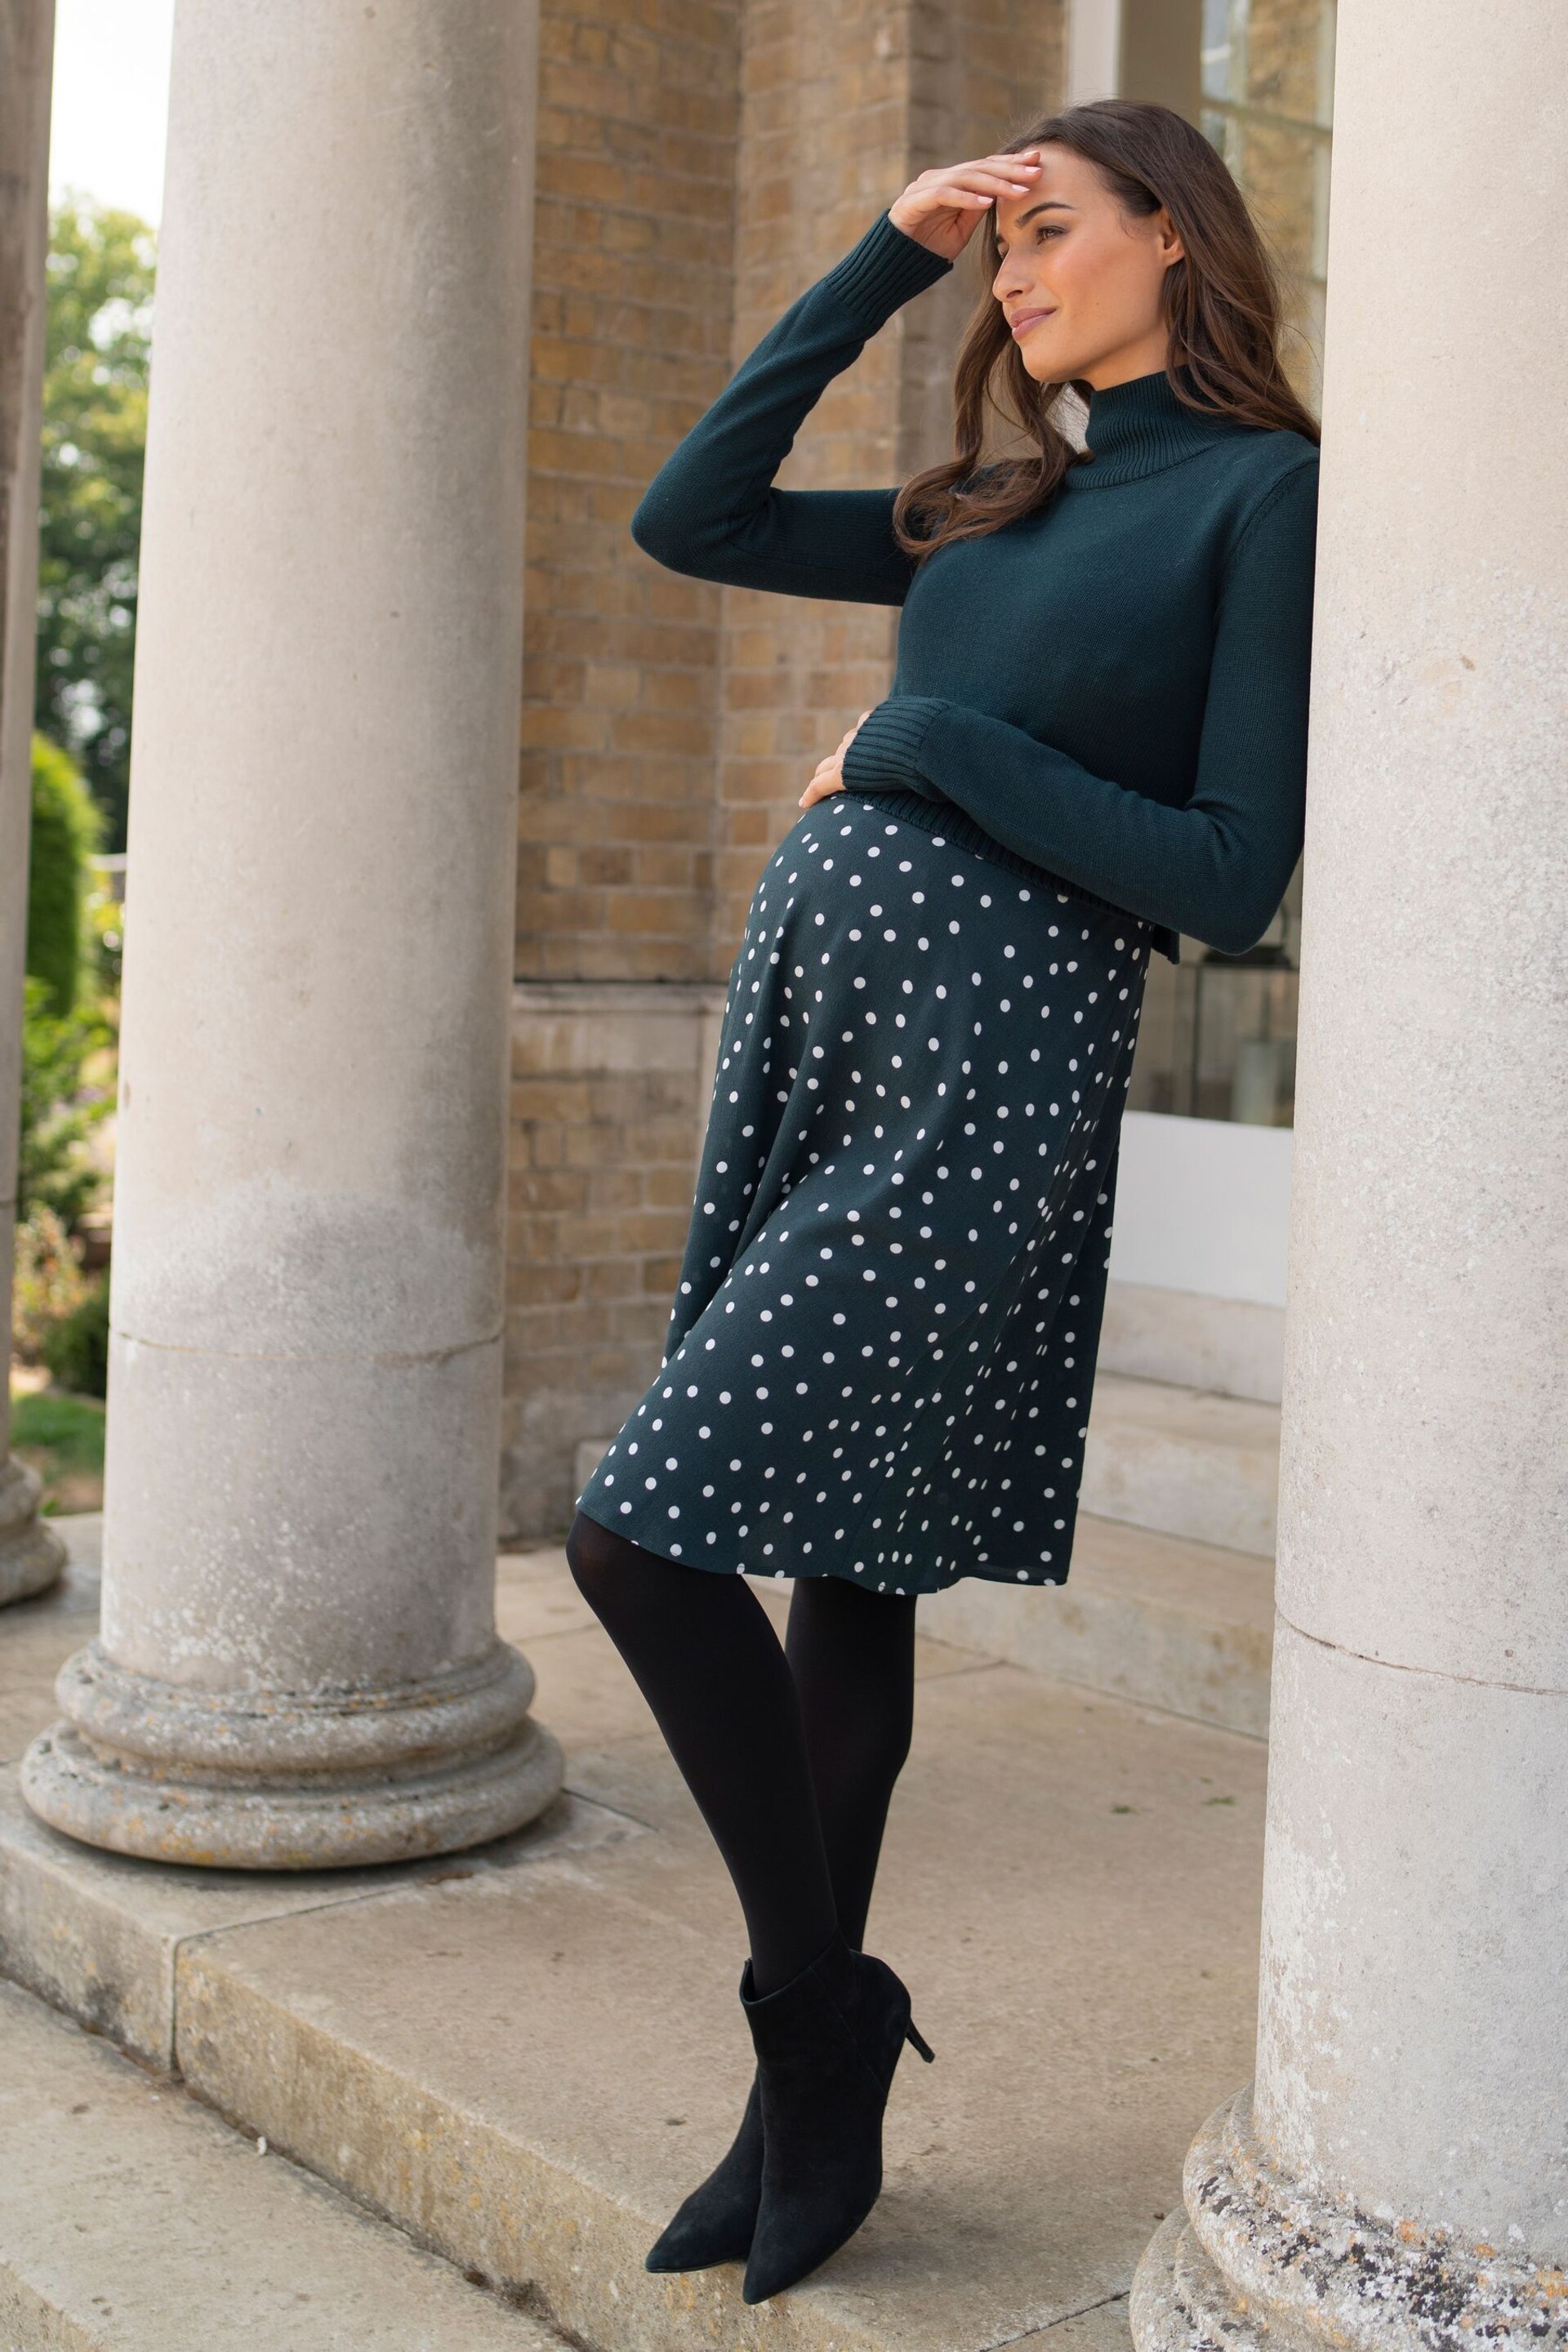 Seraphine Green Knit Topper Maternity Dress with Spot Skirt - Image 4 of 5